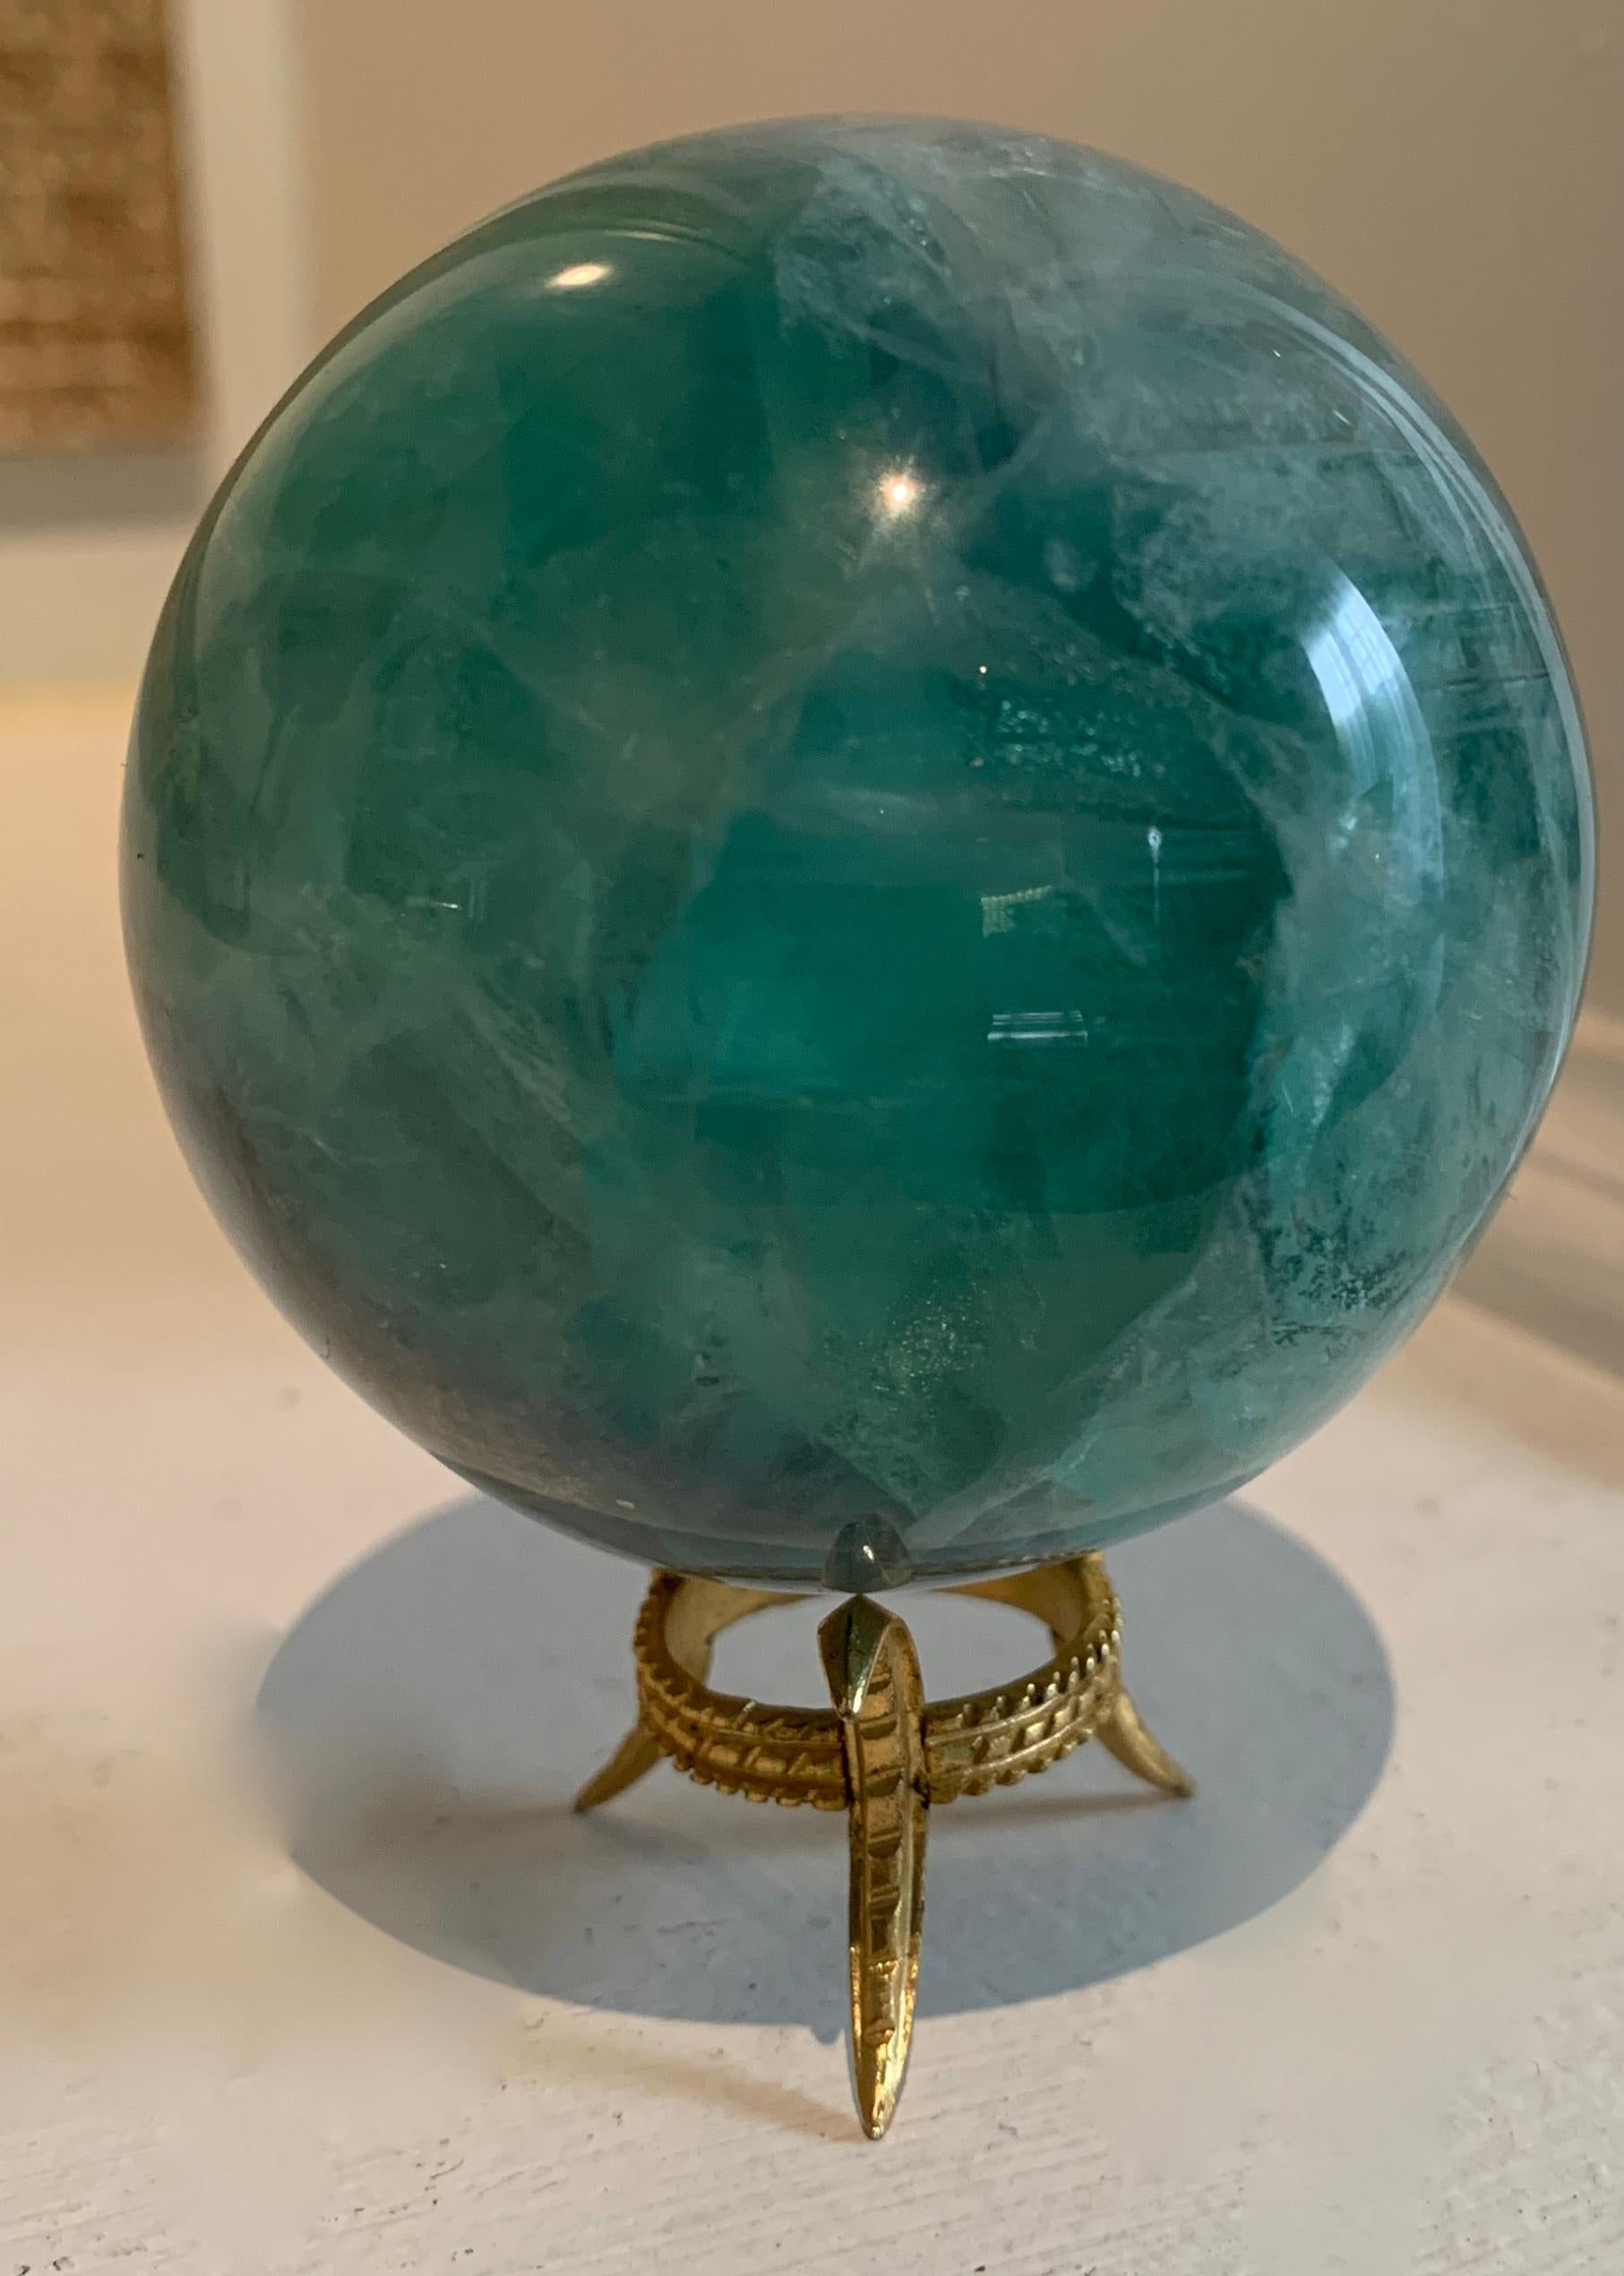 Rock crystal sphere on gold three pronged stand... a very elegant gift.

A compliment to any shelf or desk and wonderful as a sophisticated paper weight. The green rock crystal is a very peering and lovely specimen